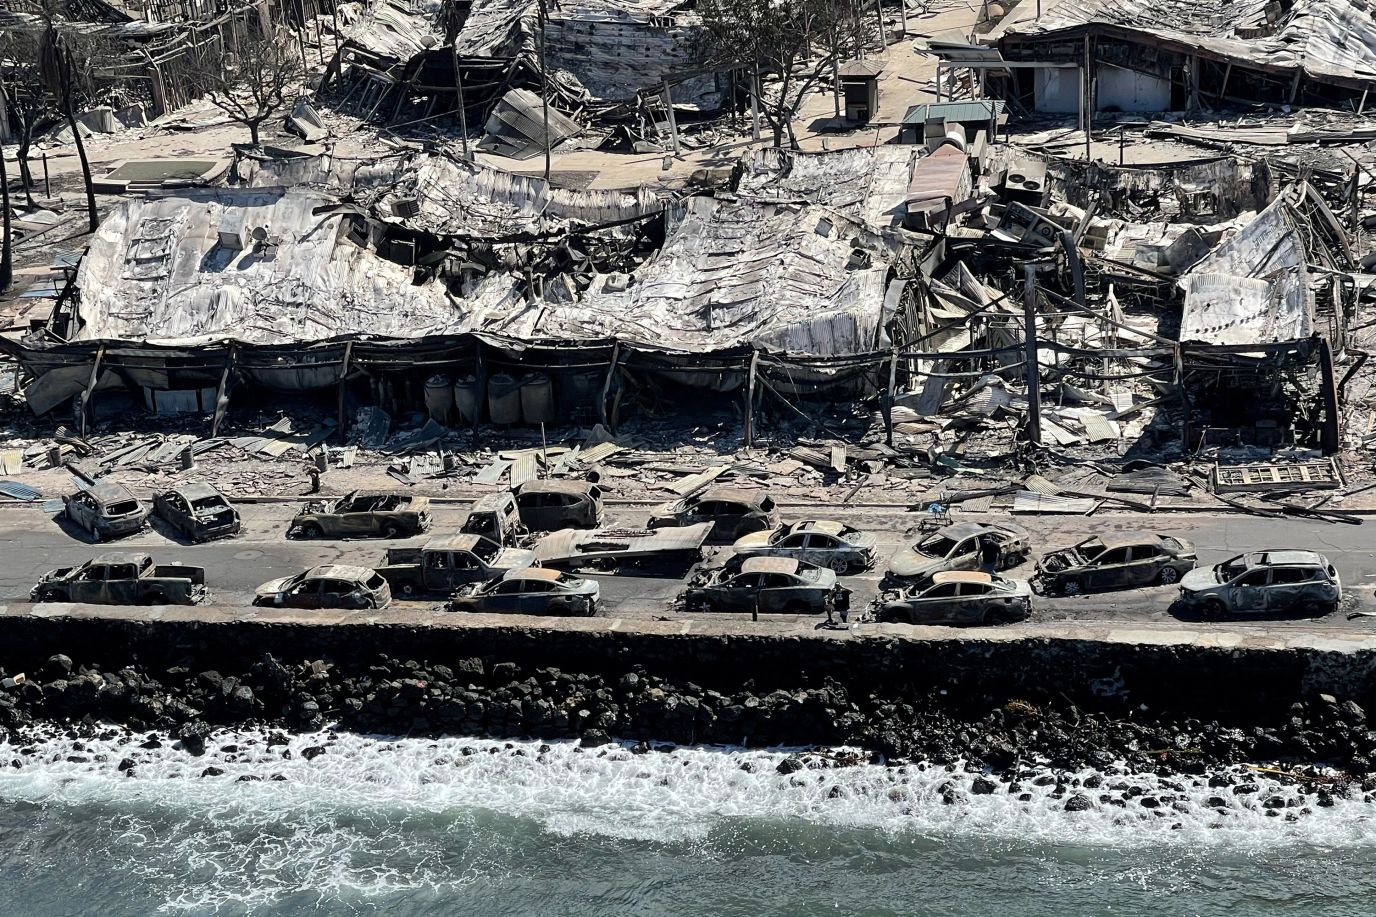 The shells of burned houses, vehicles and buildings are left on Friday, August 11, after wildfires driven by high winds burned across most of Lahaina, Hawaii. 